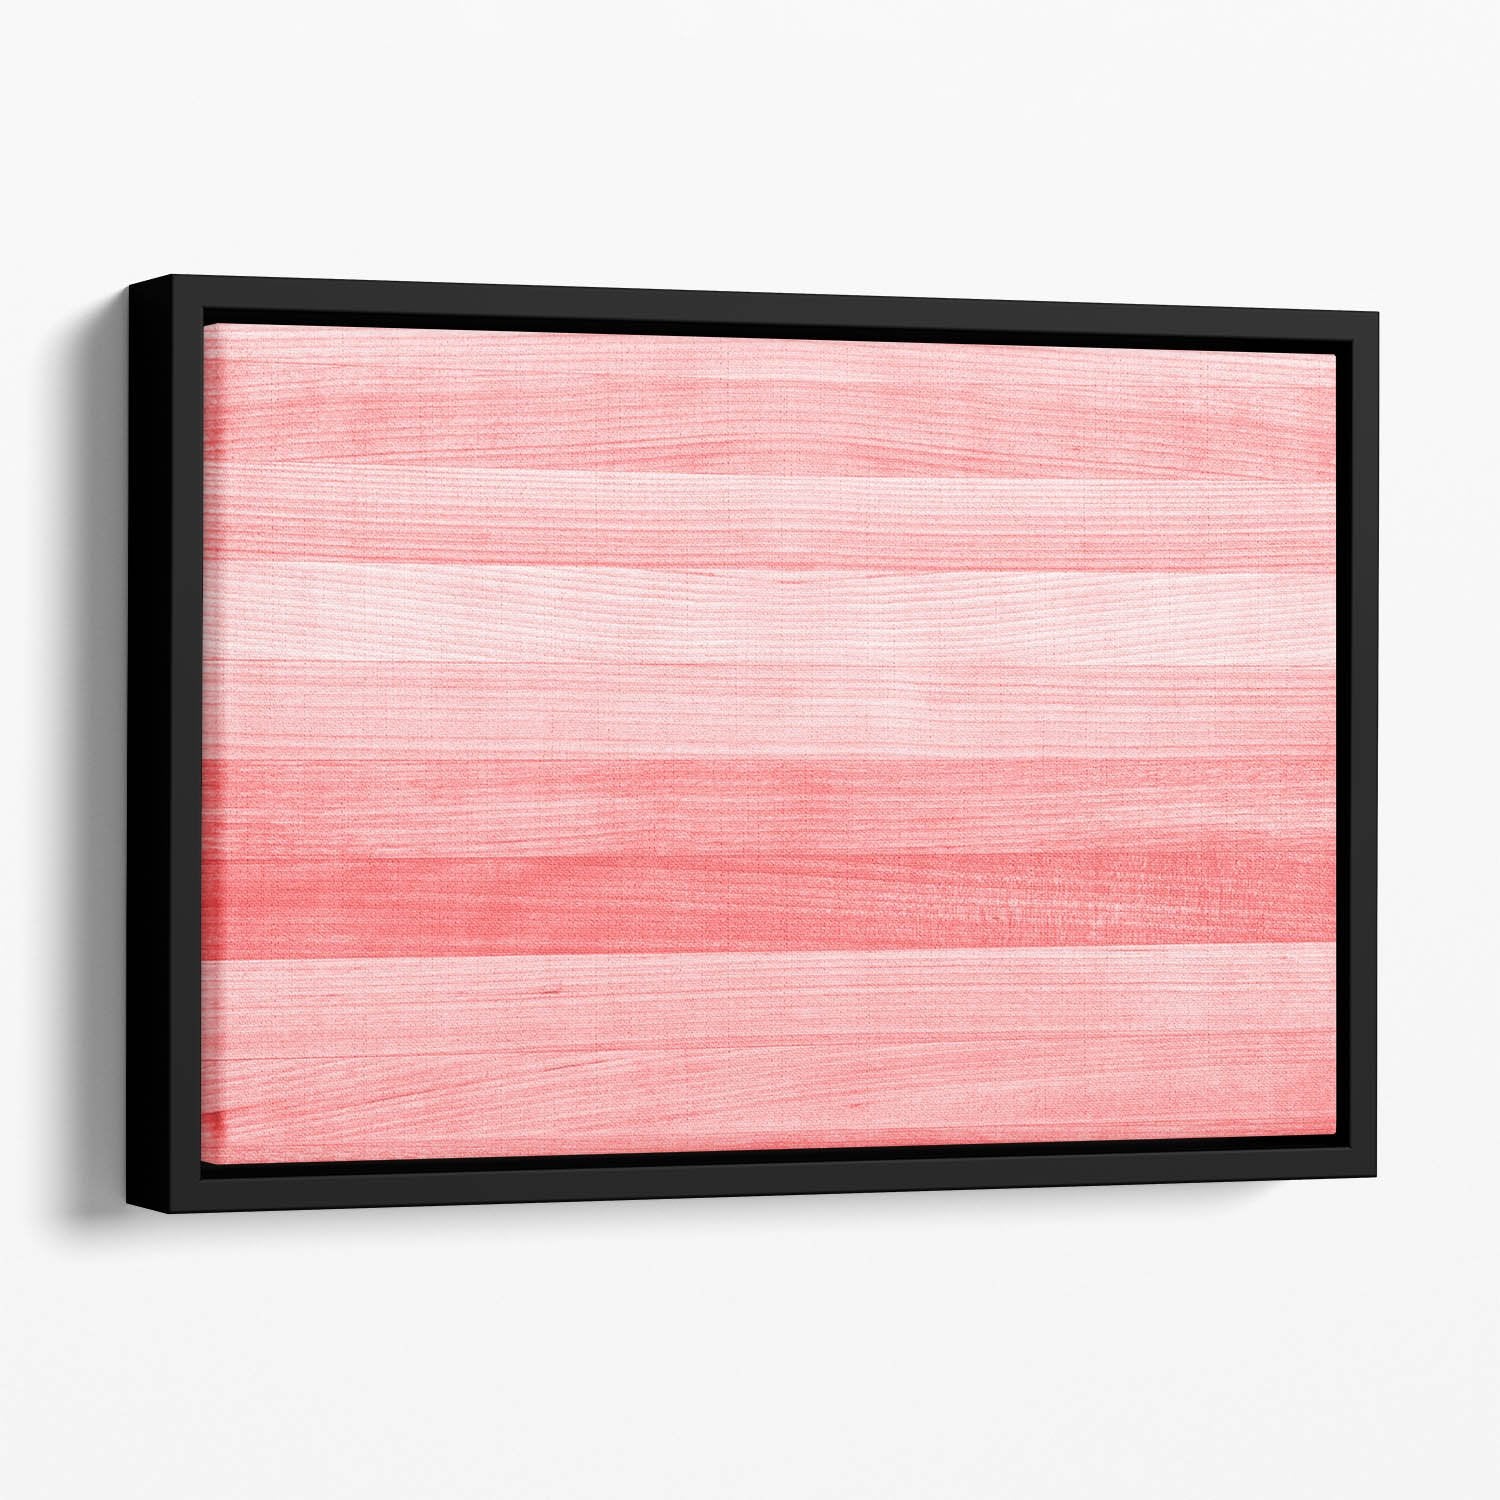 Coral pink or peach and salmon color Floating Framed Canvas